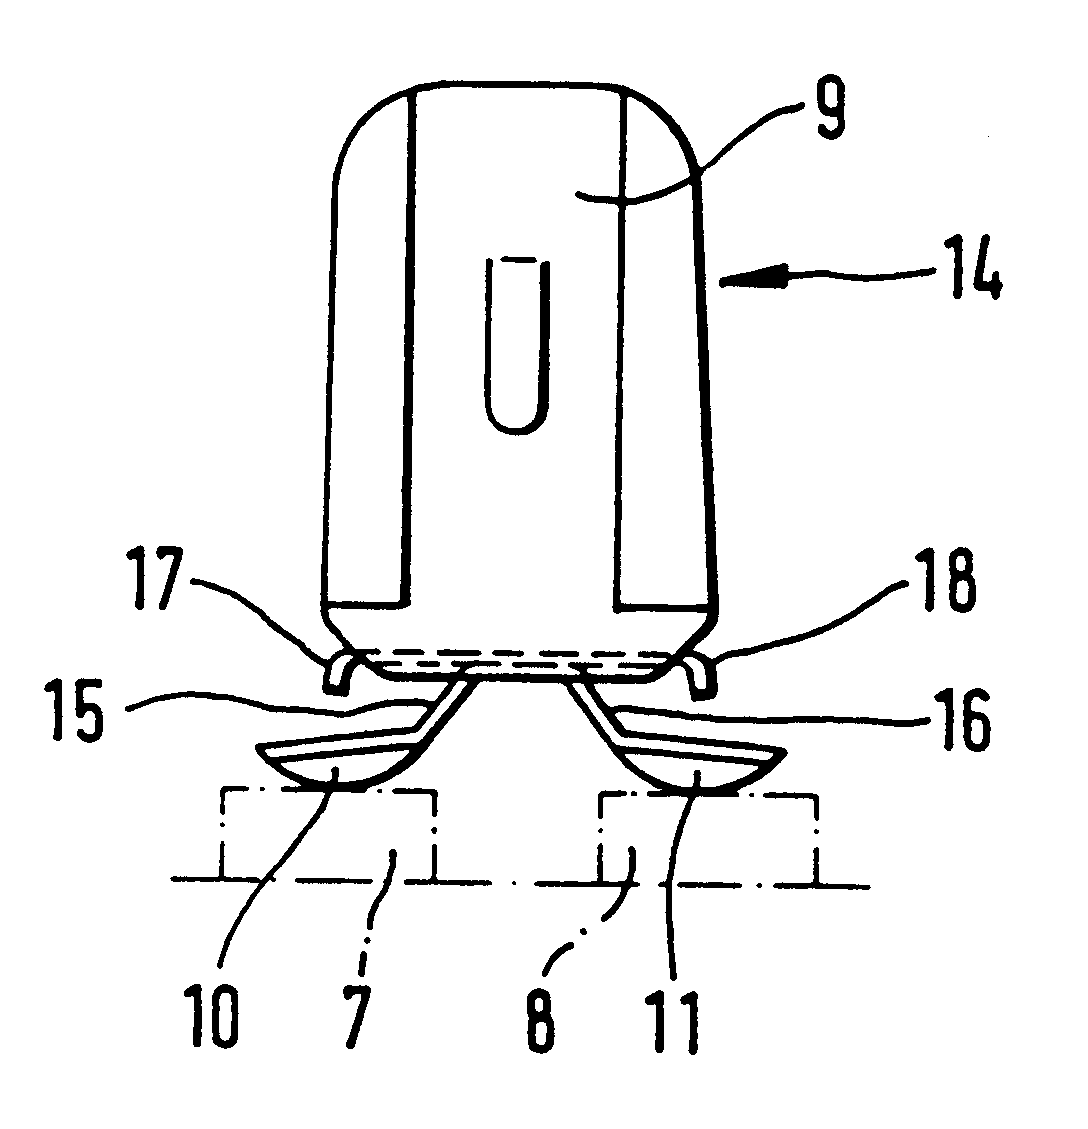 Lever transmitter for determining a filling level of liquid in a tank